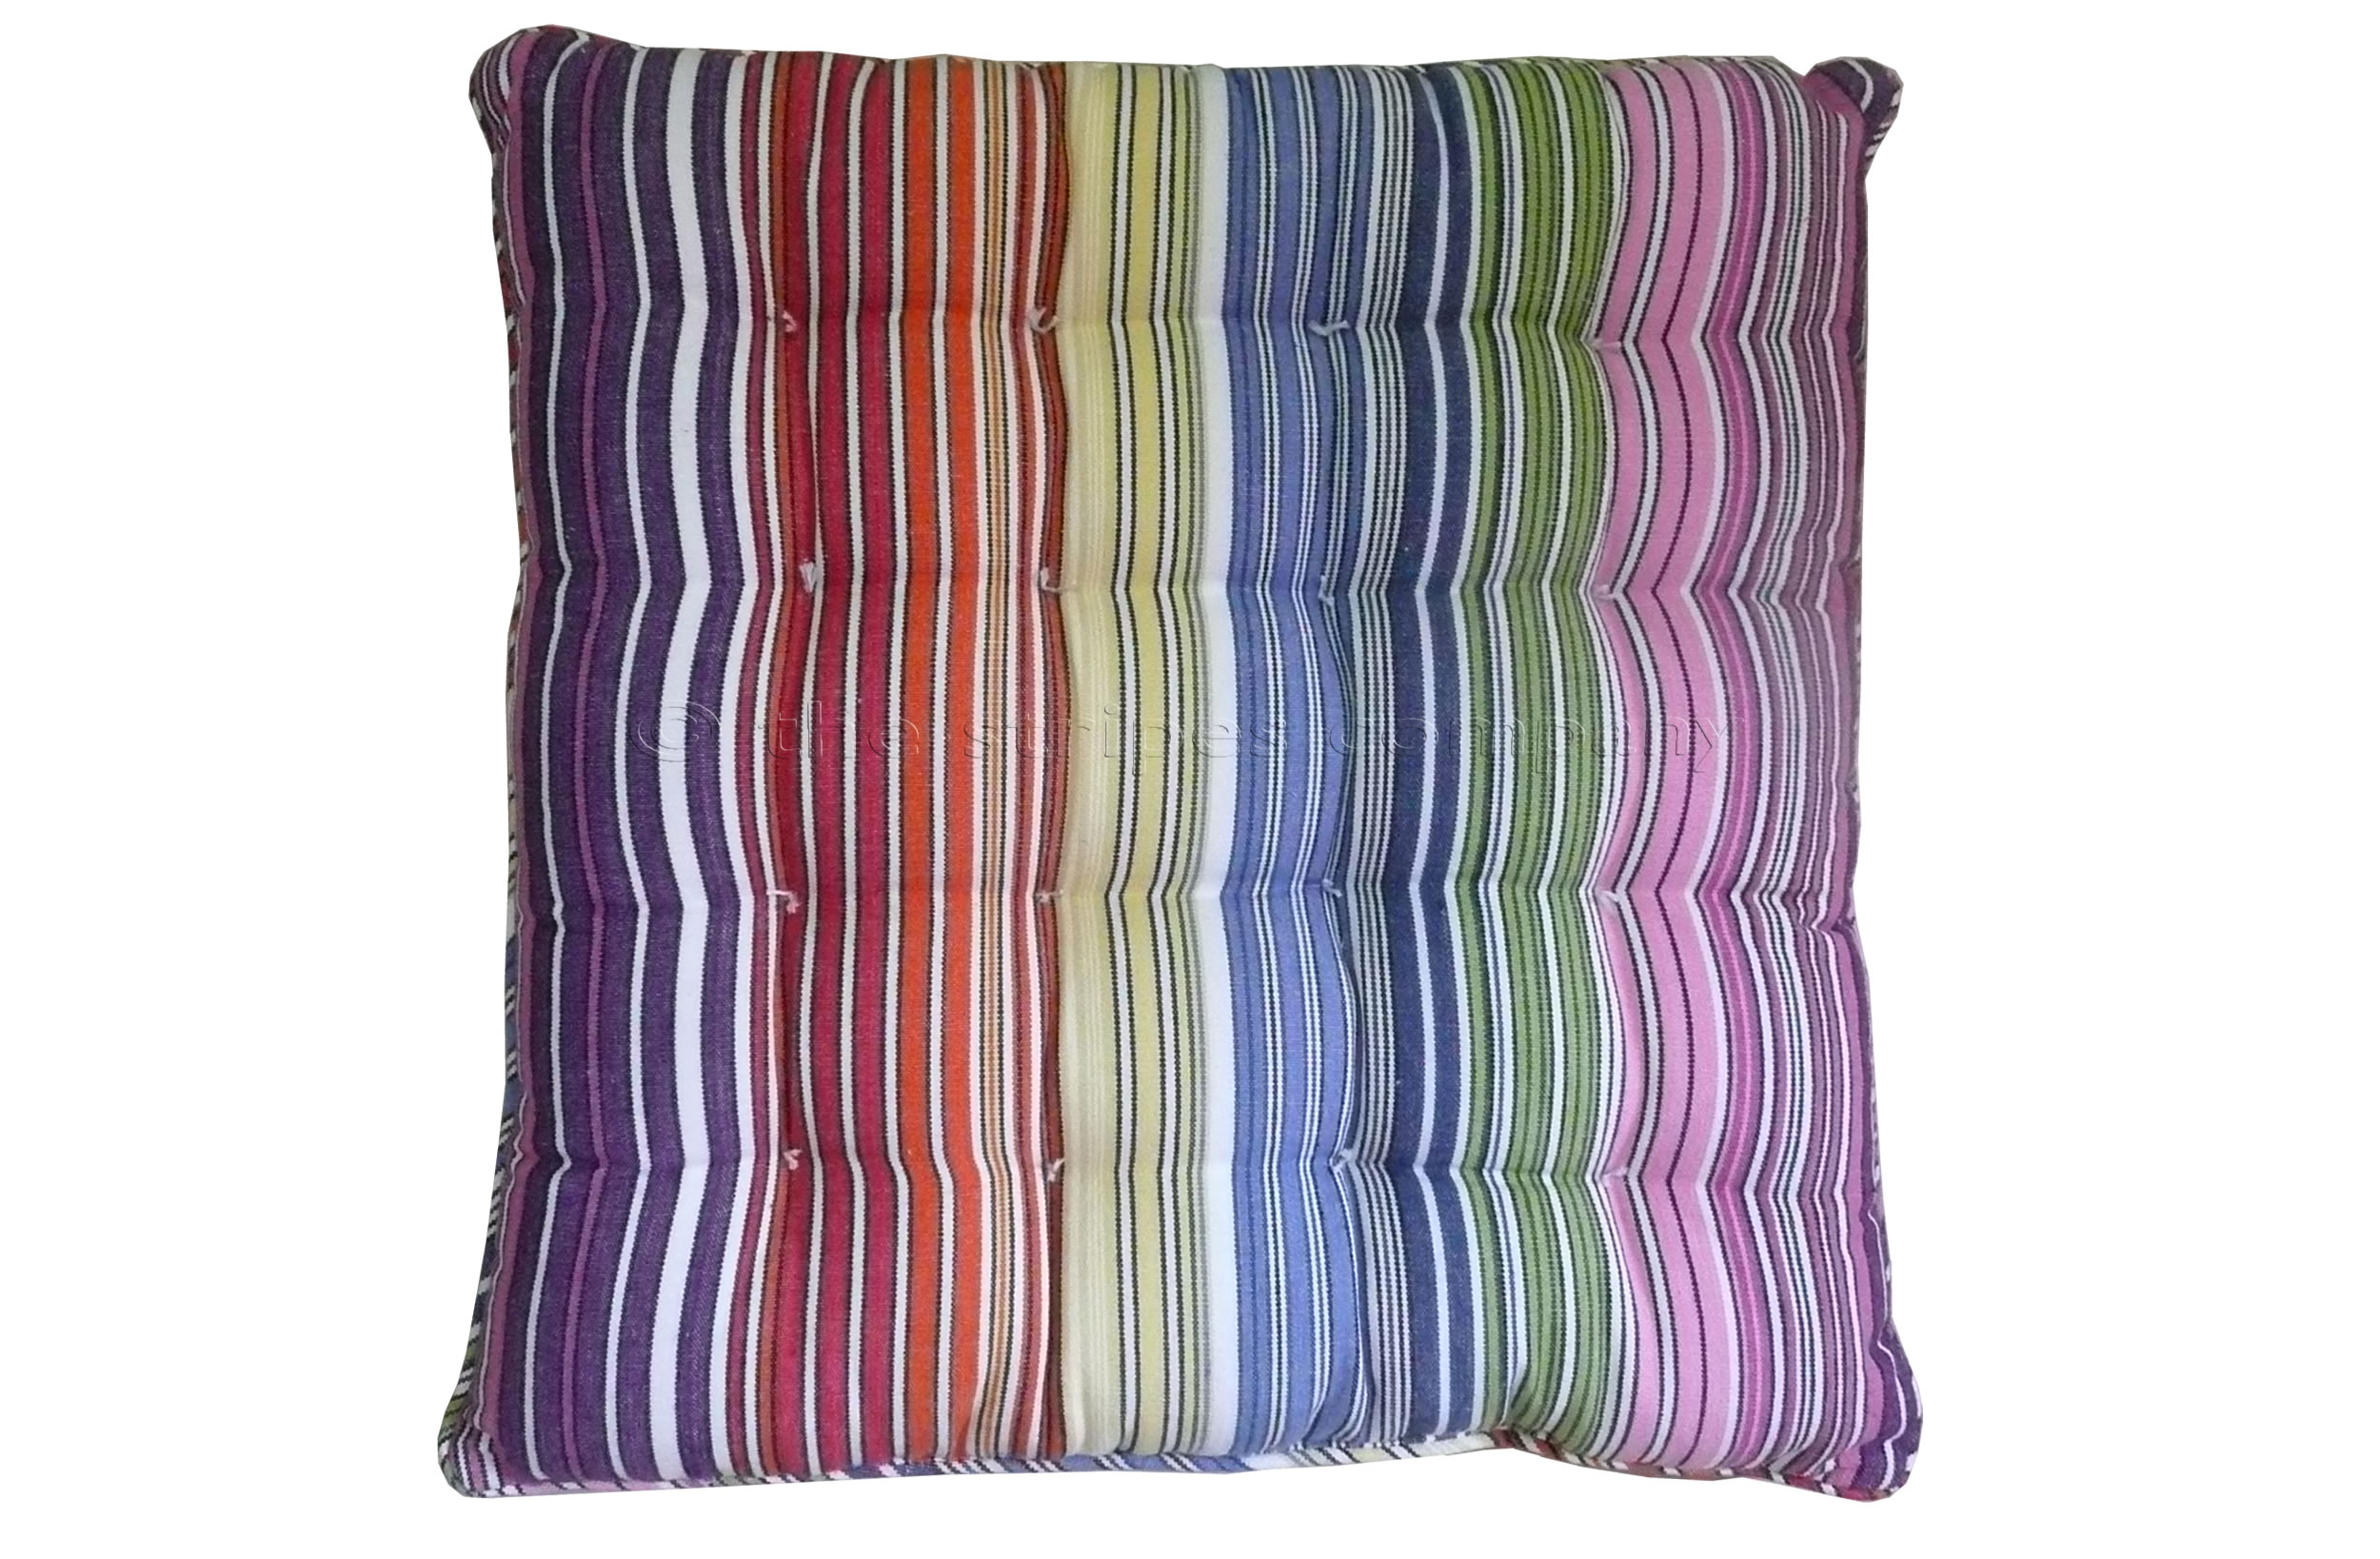 Multi Striped Seat Pads with Piping | Square Piped Seat Pads narrow rainbow and white